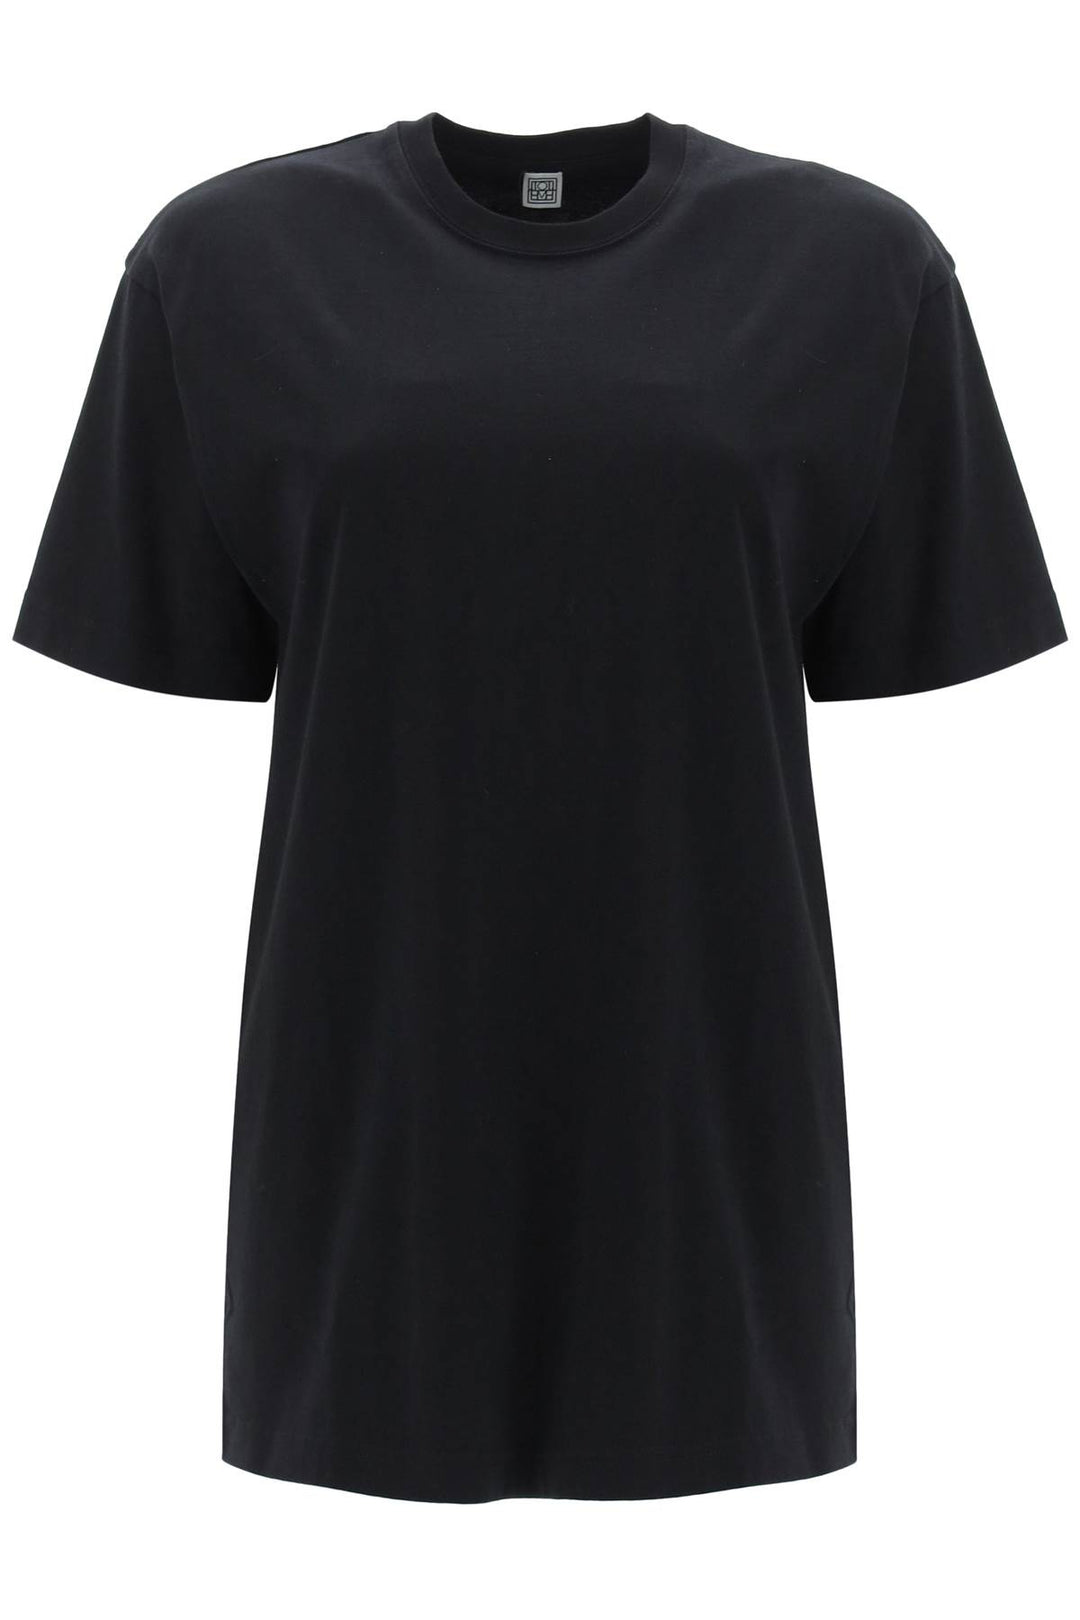 Toteme Relaxed Fit Straight T Shirt   Nero